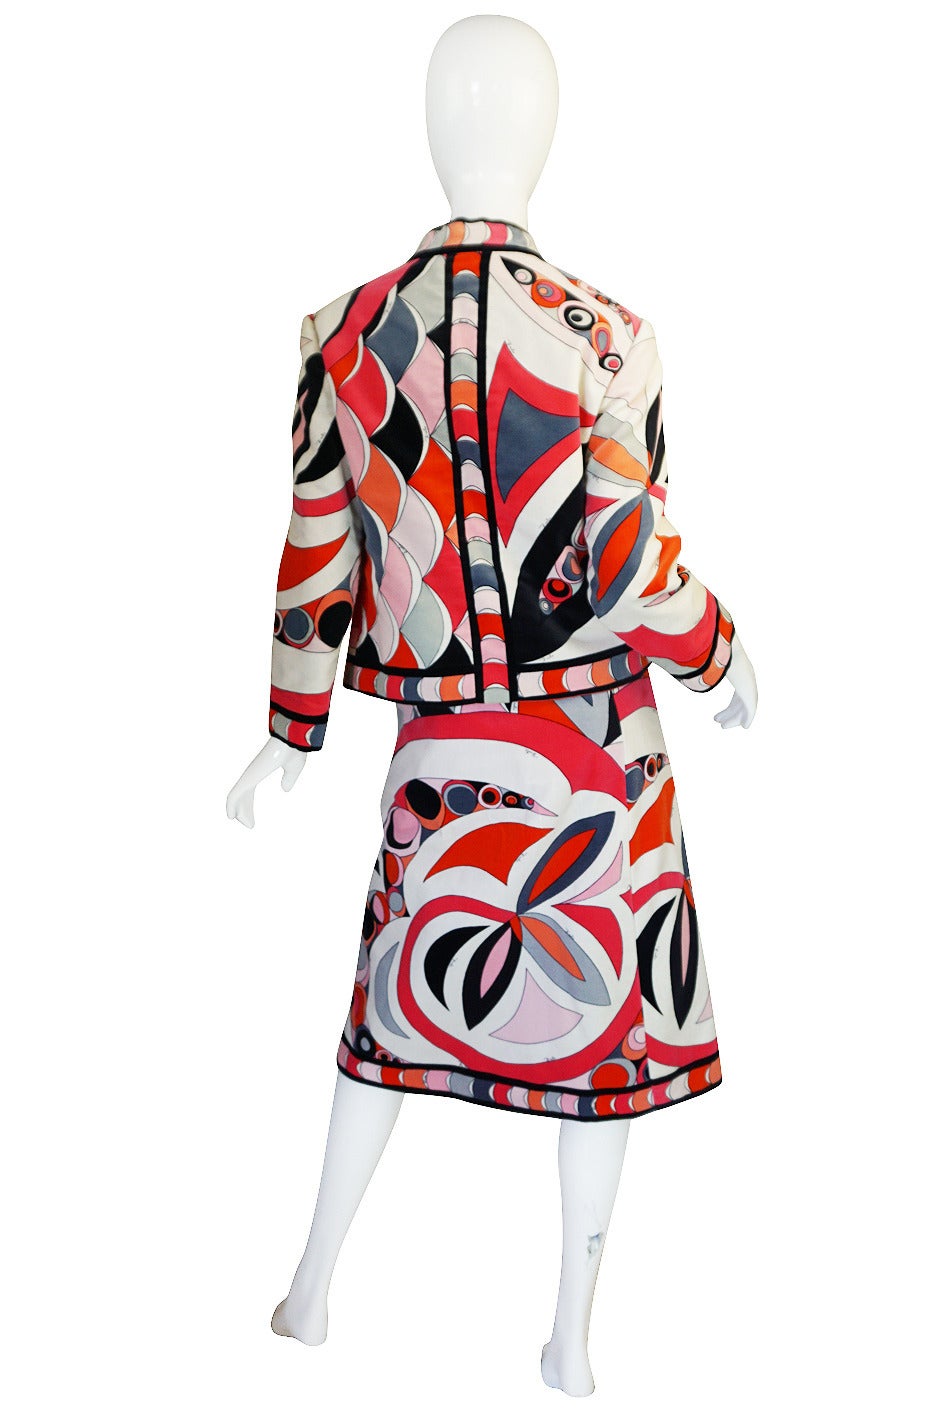 This set is just absolutely gorgeous and in person the colors are even more fabulous then how they have photoed. It really pops and you just feel happy just looking at it. It is an early 1960s printed Emilio Pucci skirt set that is made of his